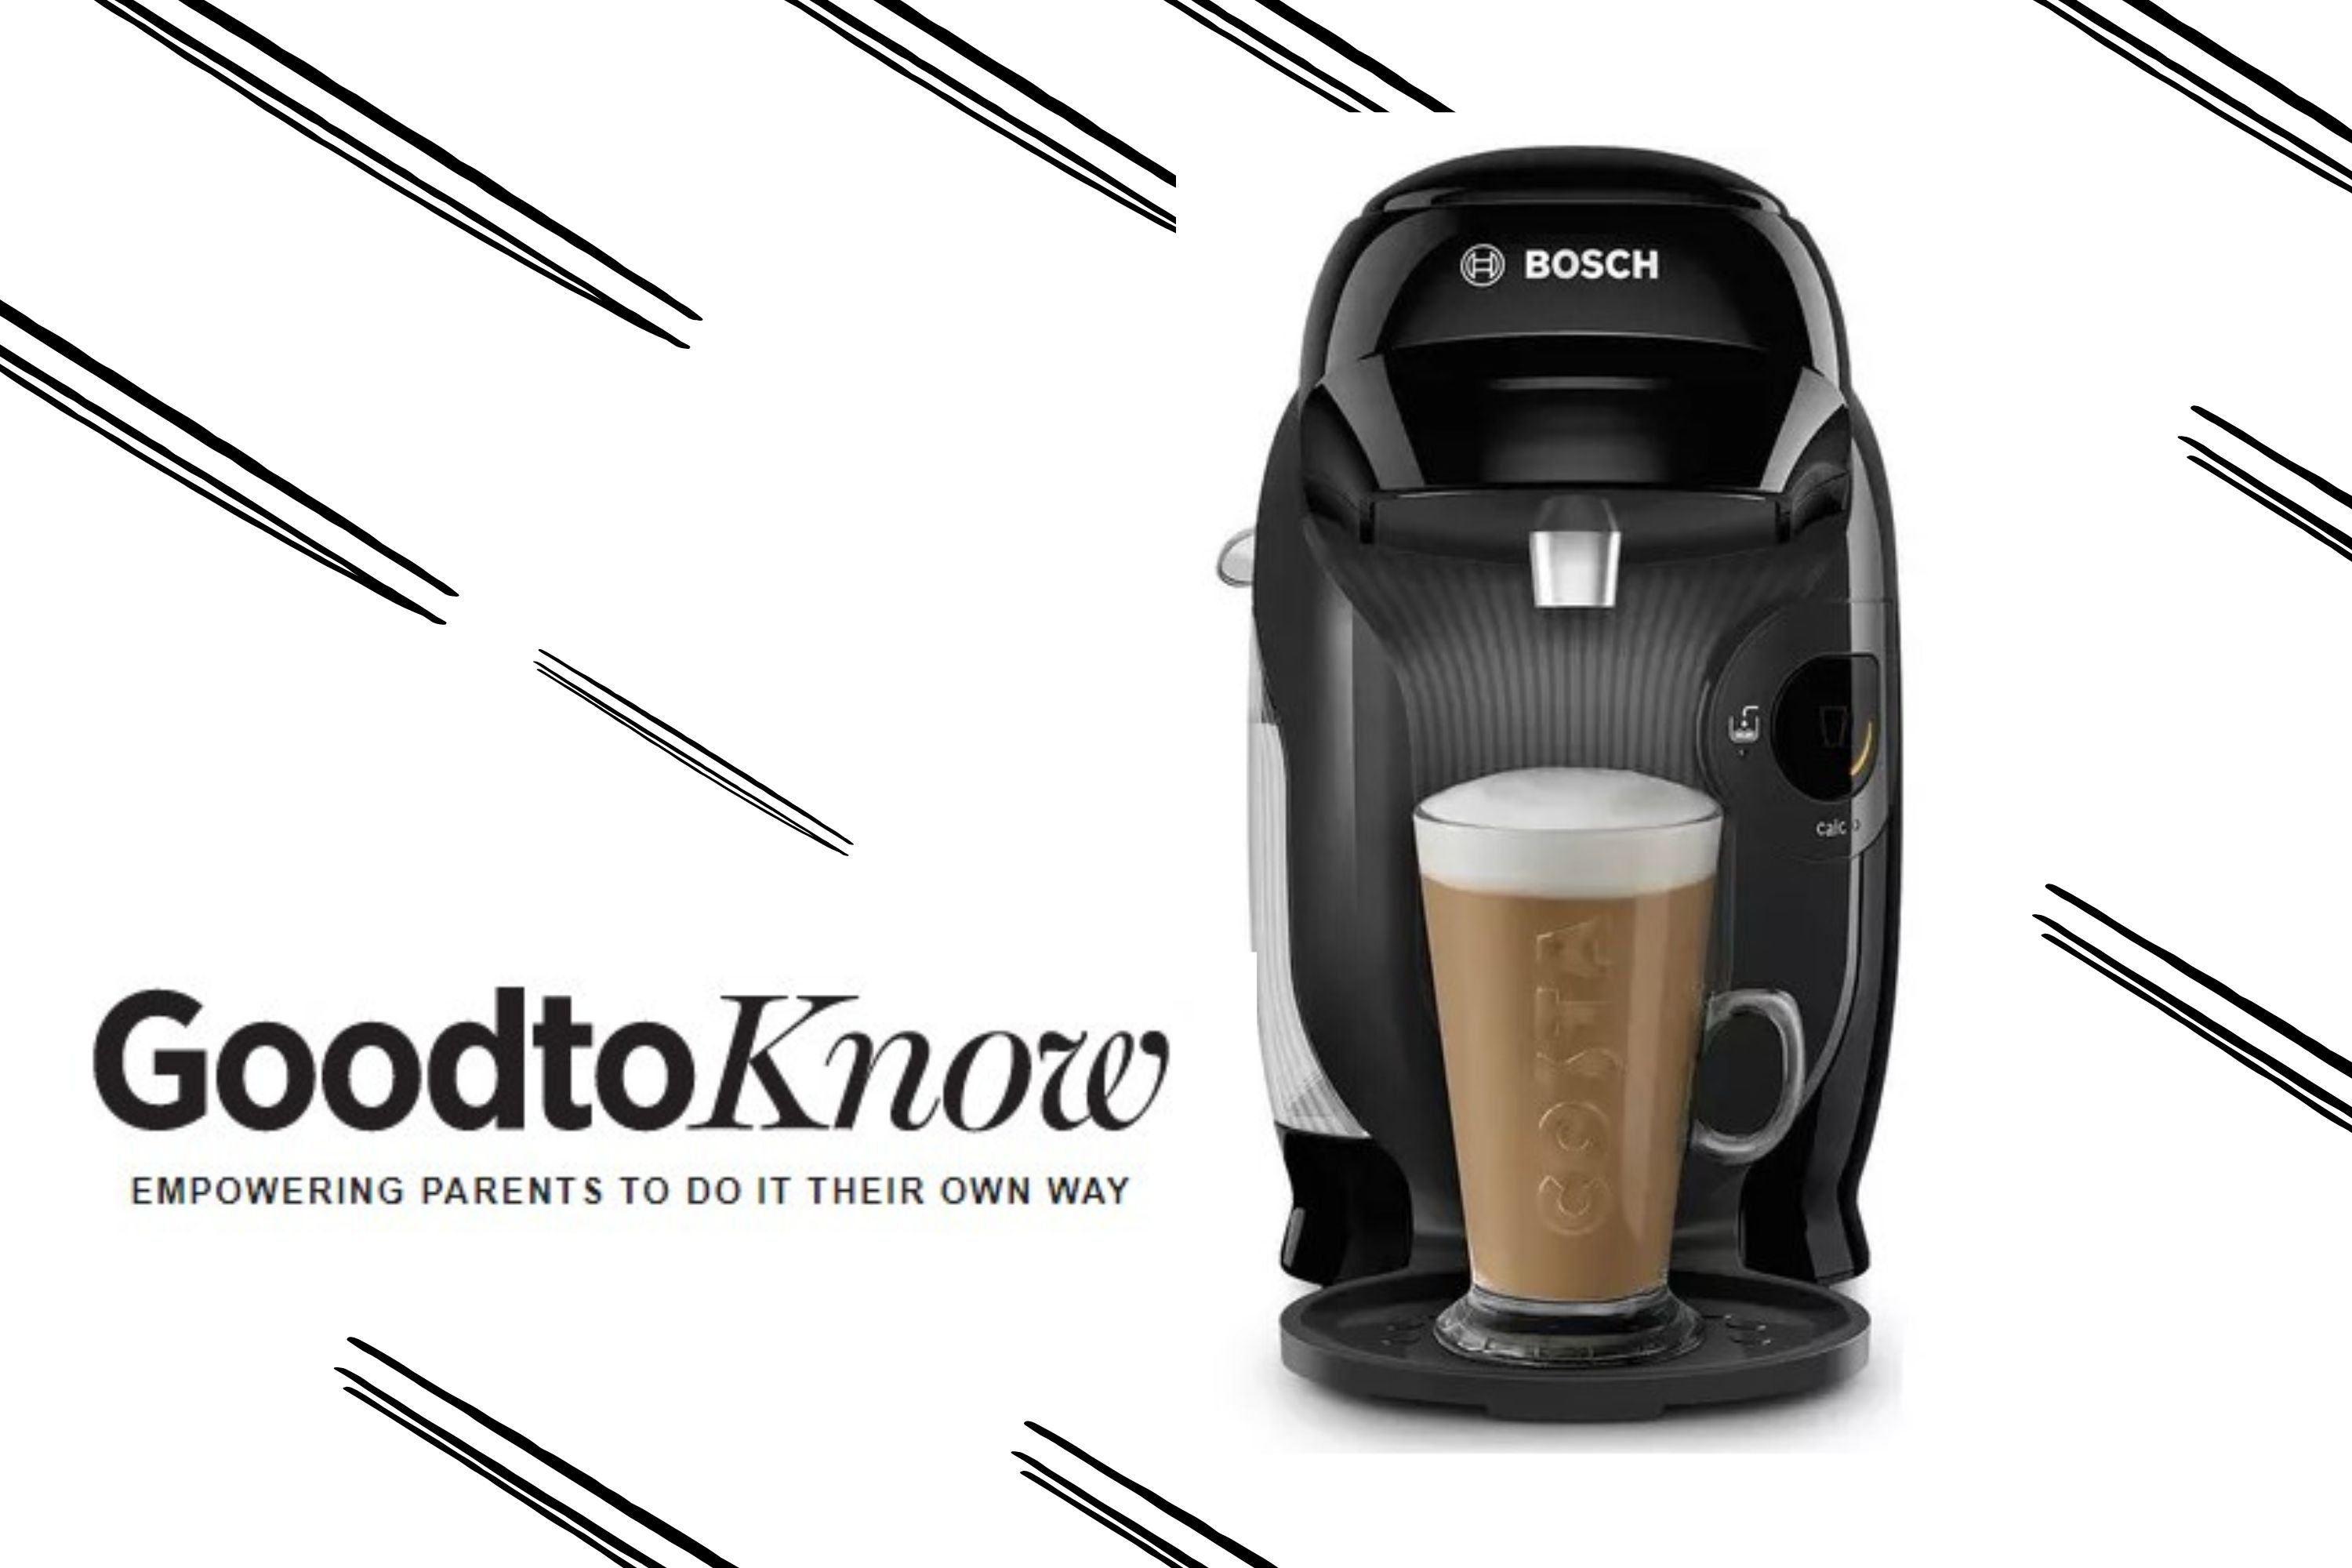 An image of the Tassimo by Bosch pod coffee machine, on sale for Black Friday